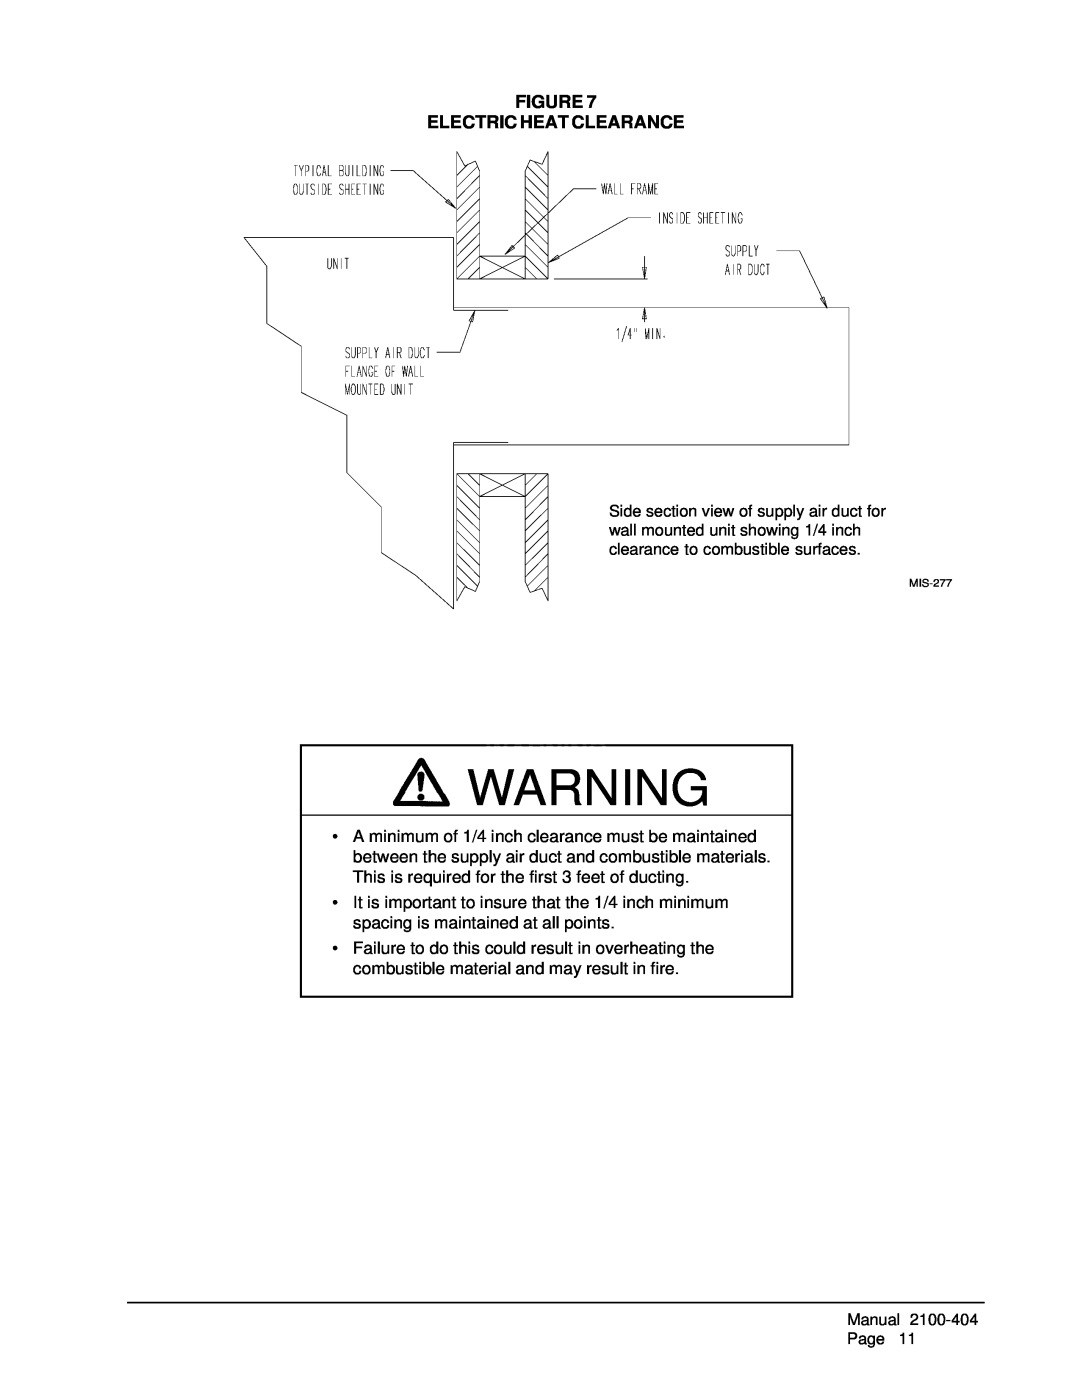 Bard MIS-656 installation instructions Figure Electric Heat Clearance, Manual 2100-404Page 